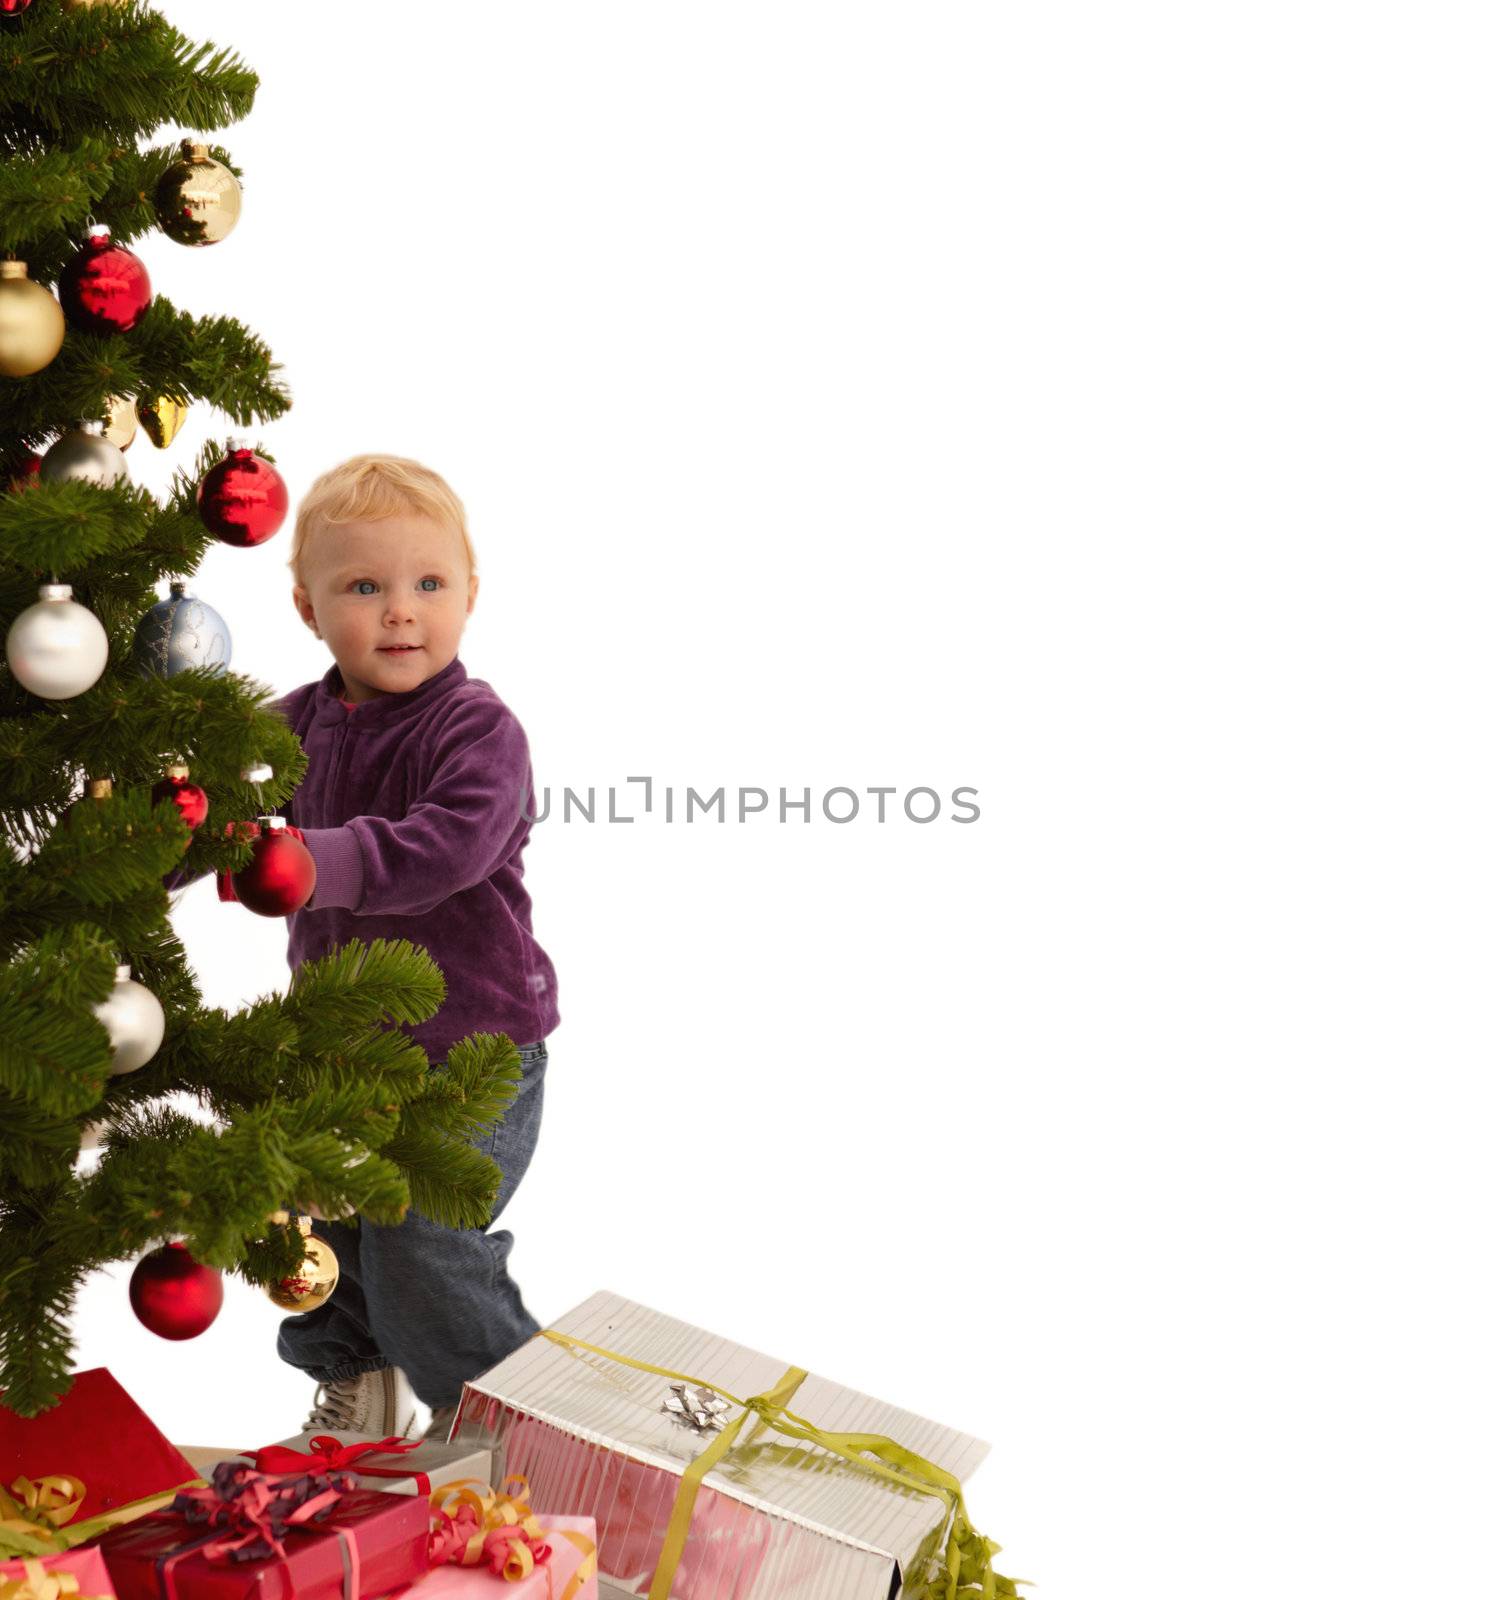 Christmas - Child putting decorations on tree by FreedomImage